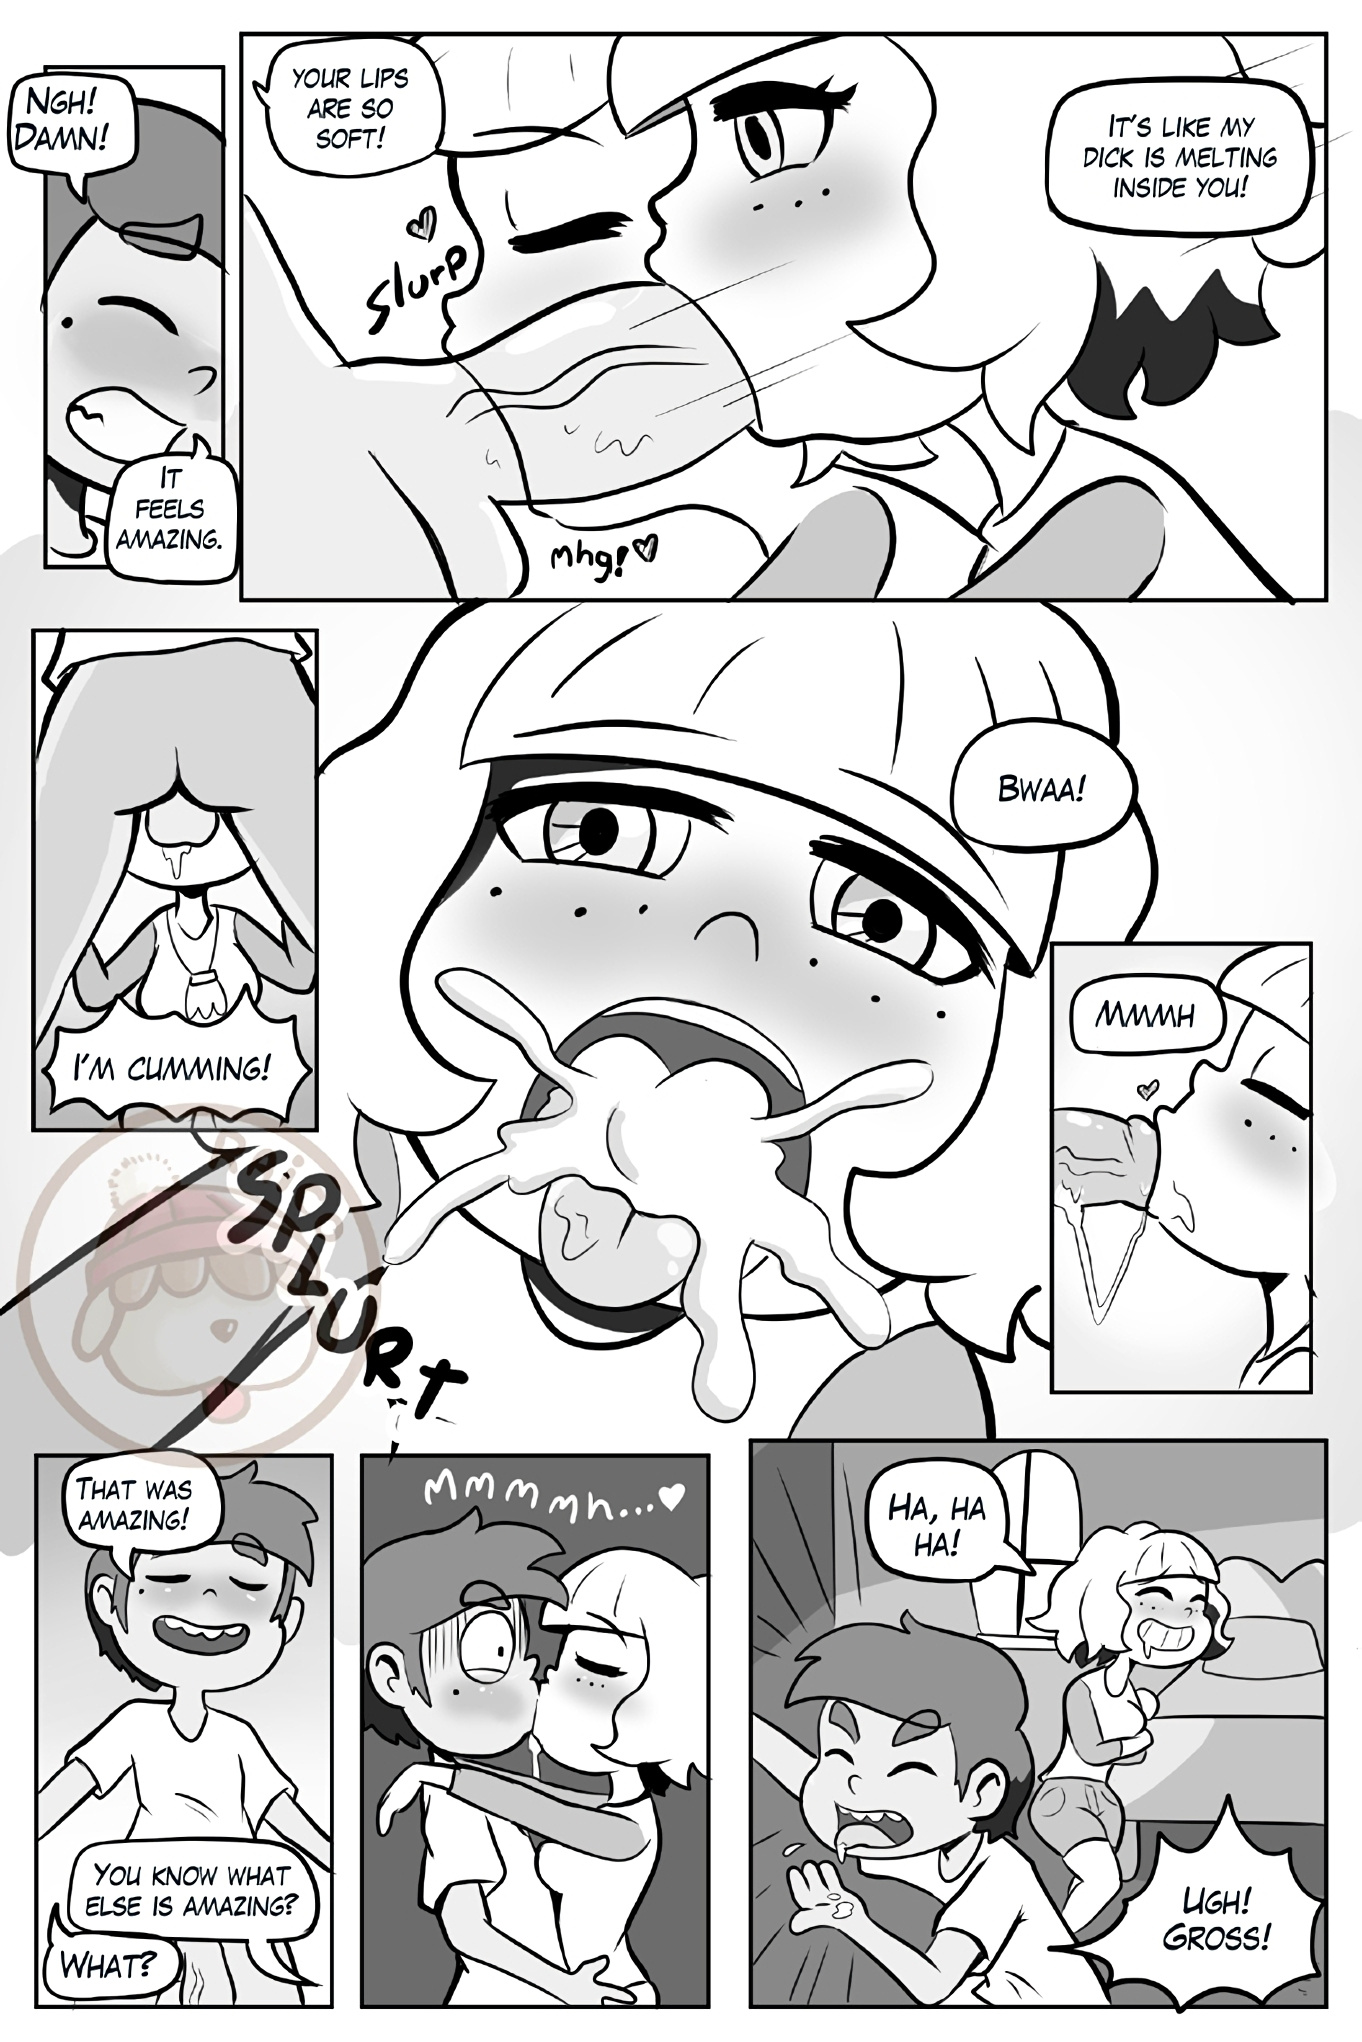 END OF YEAR PARTY porn comics Oral sex, Lolicon, Straight Shota